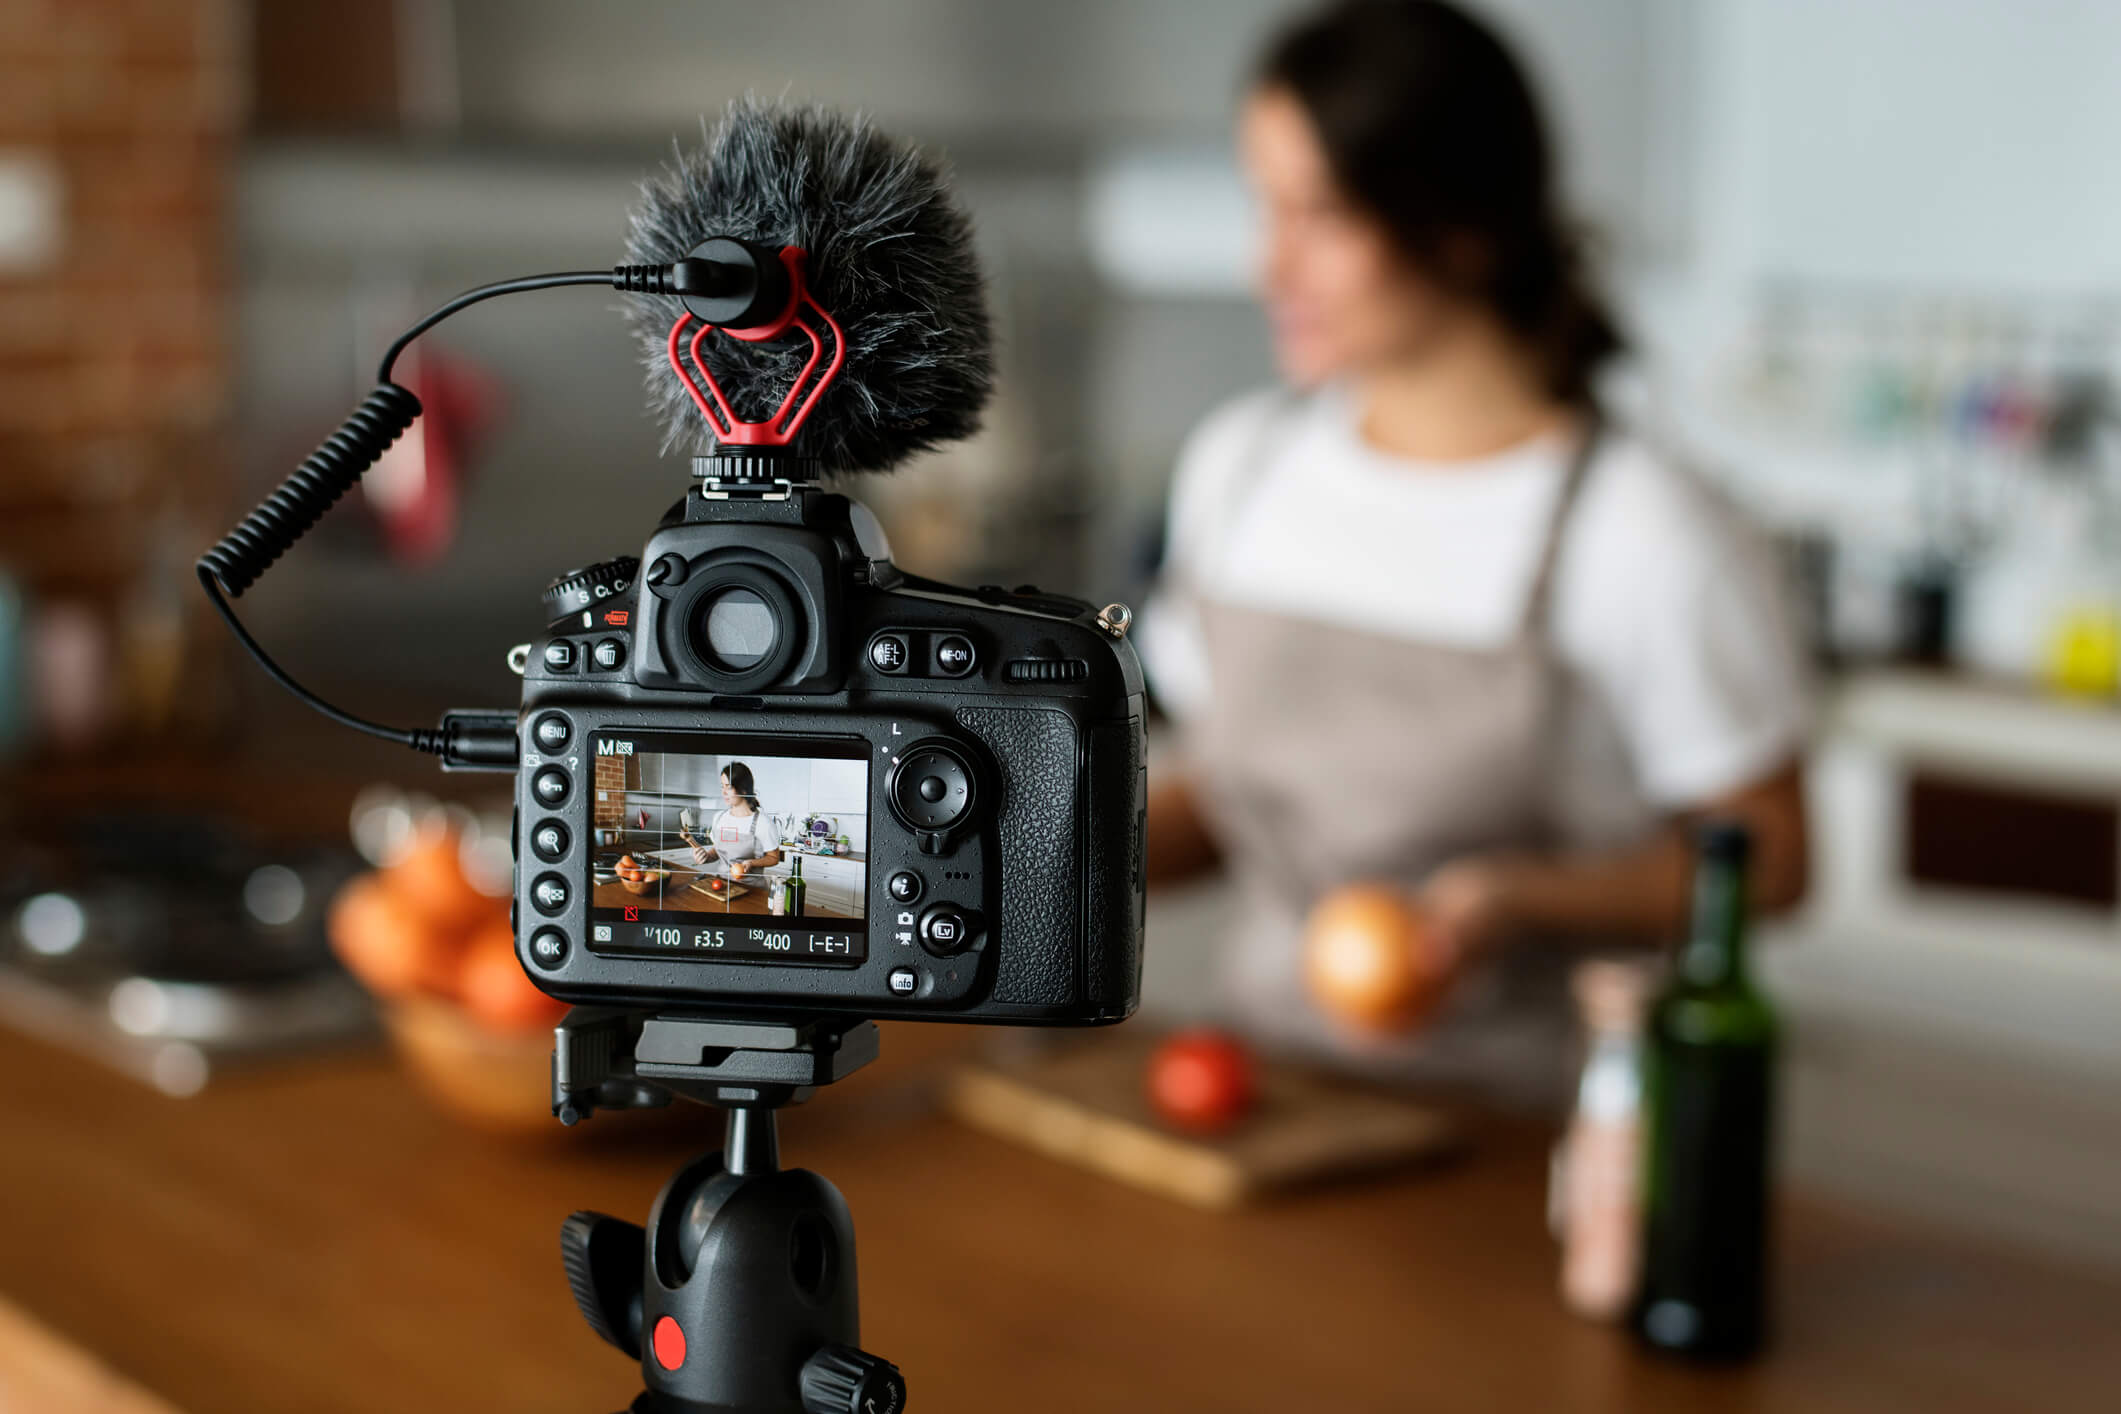 Video SEO Strategies to Boost Your Content's Ranking